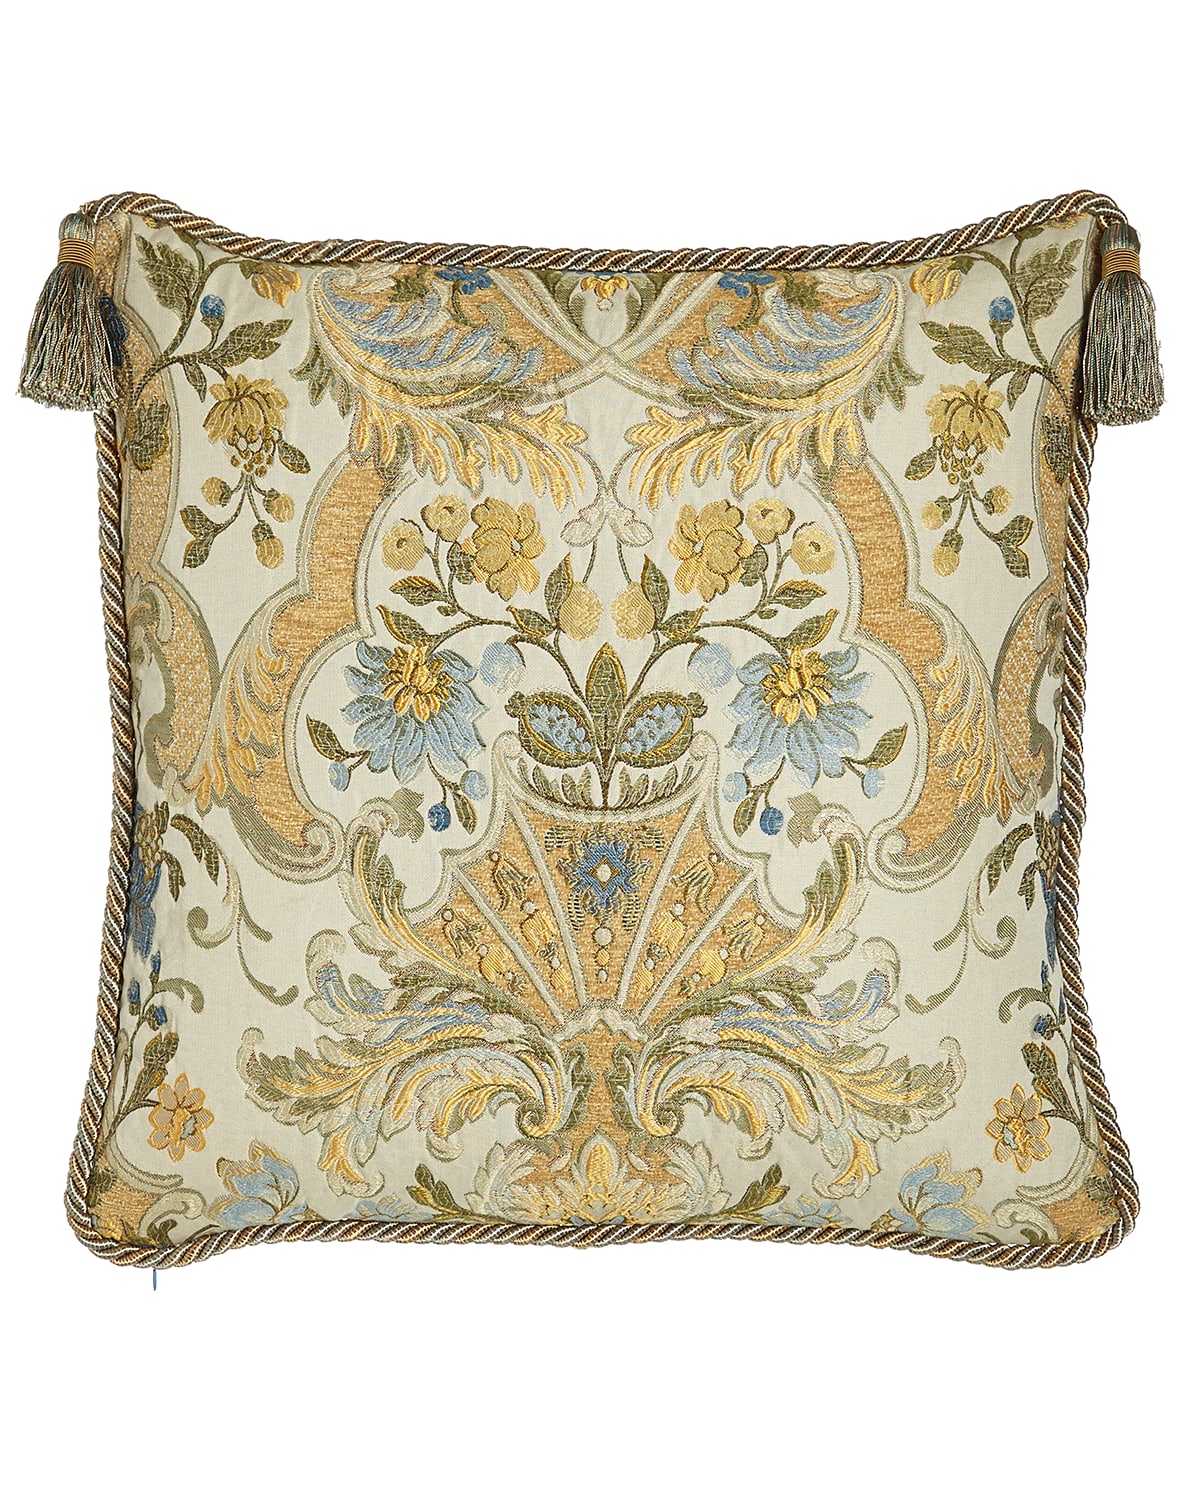 Image Austin Horn Collection Manor Pillow with Tassels, 20"Sq.